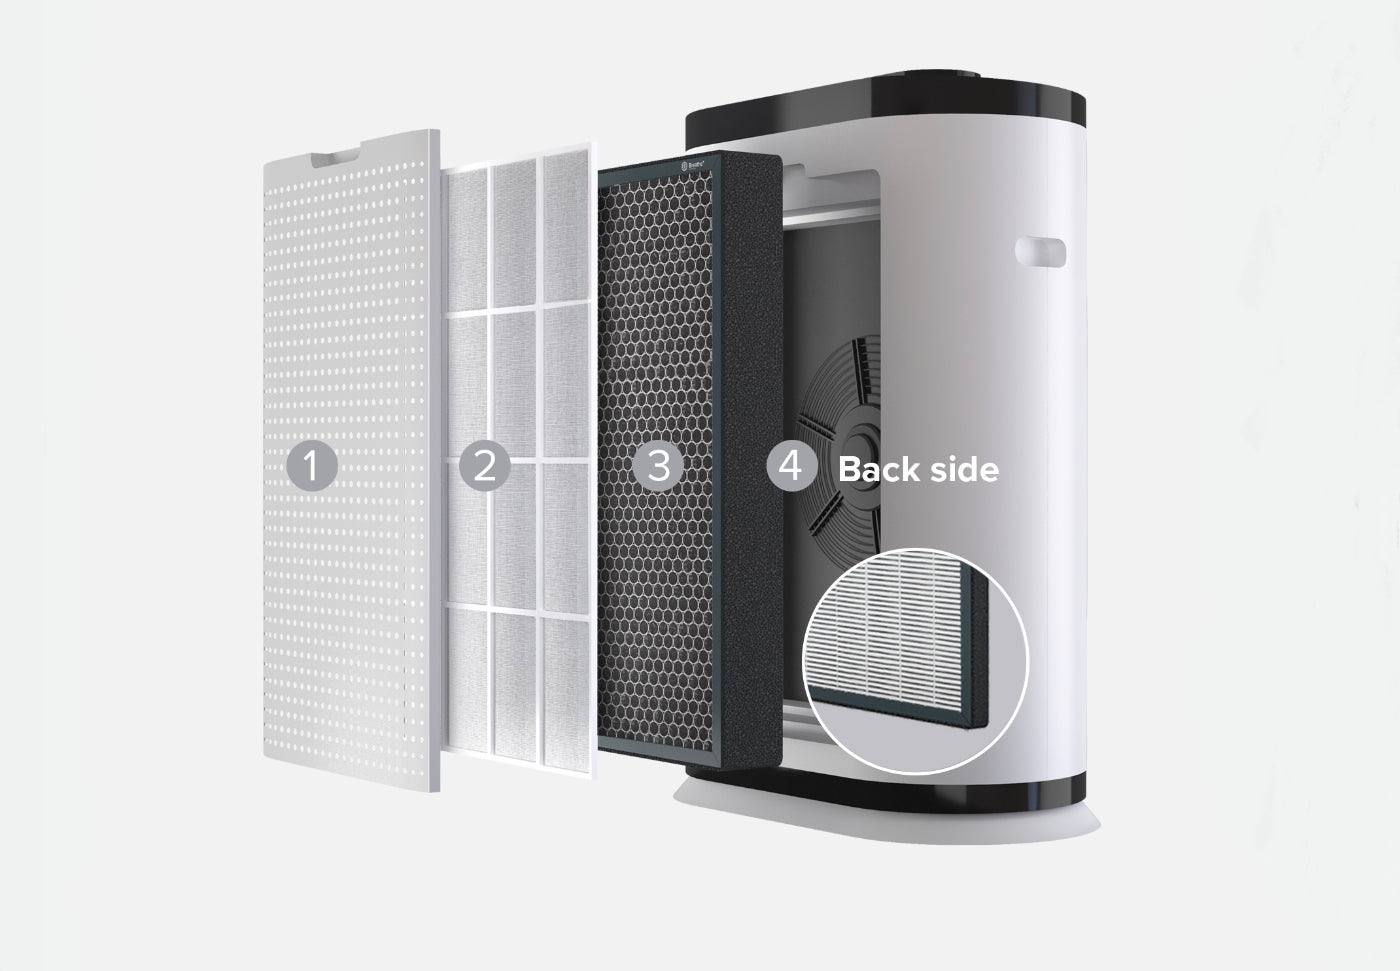 Breathe+  Pro Clean Air Filter broken down into filter components to showcase how it eliminates germs and cleans the air 